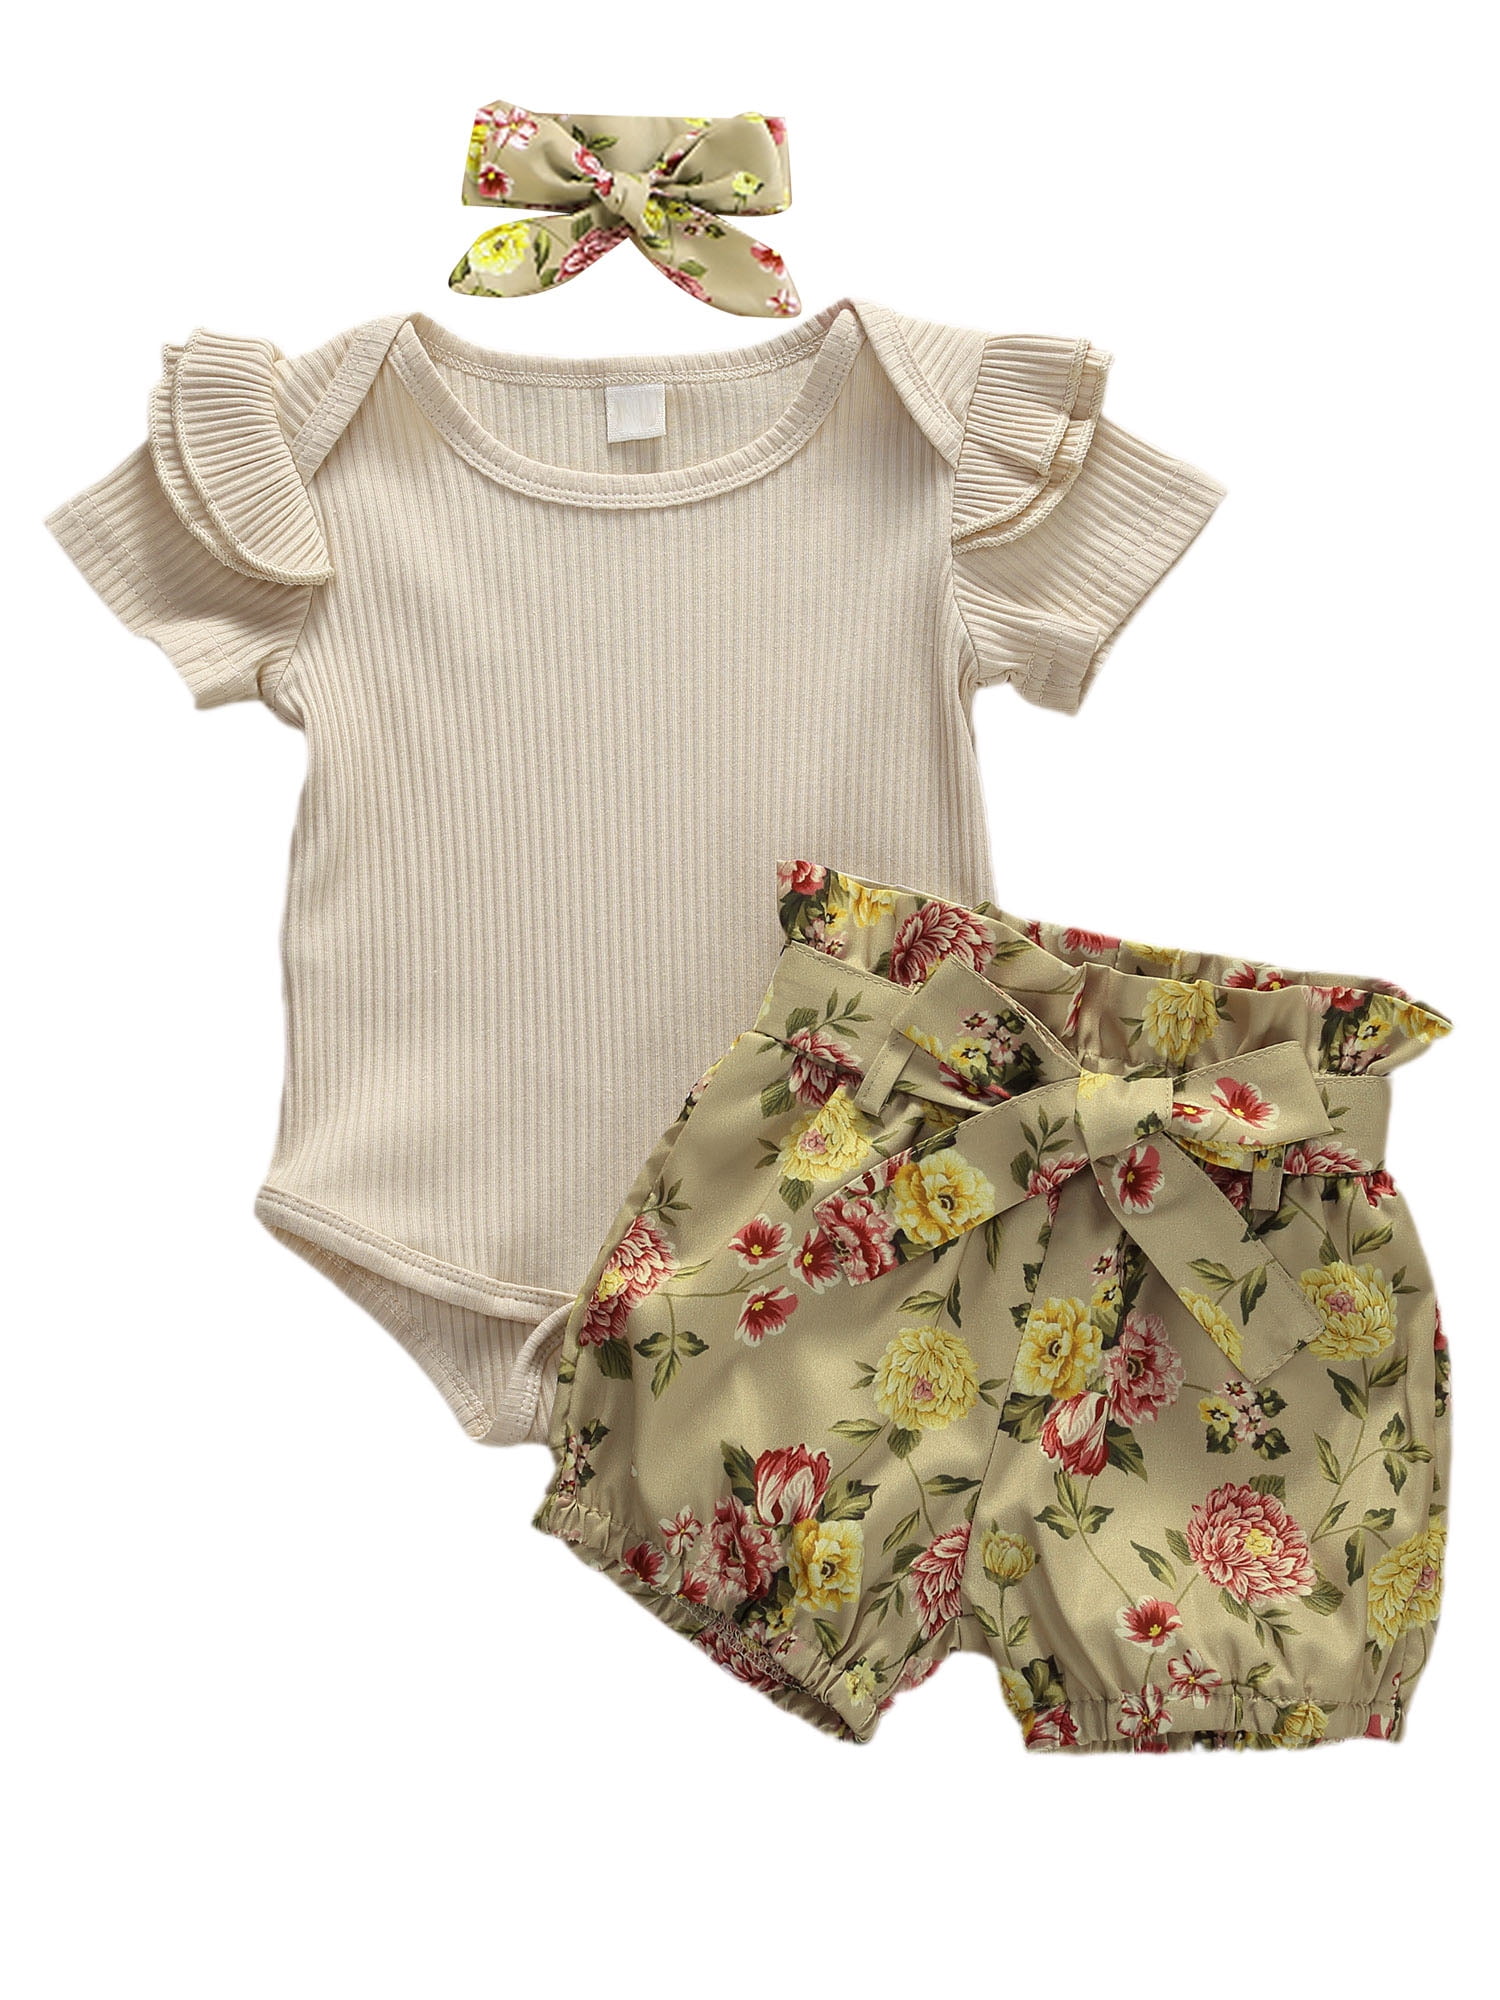 0-24 Months Newest Infant Baby Girls Ruched Romper Jumpsuit Floral Print Pants Headband Outfits Set